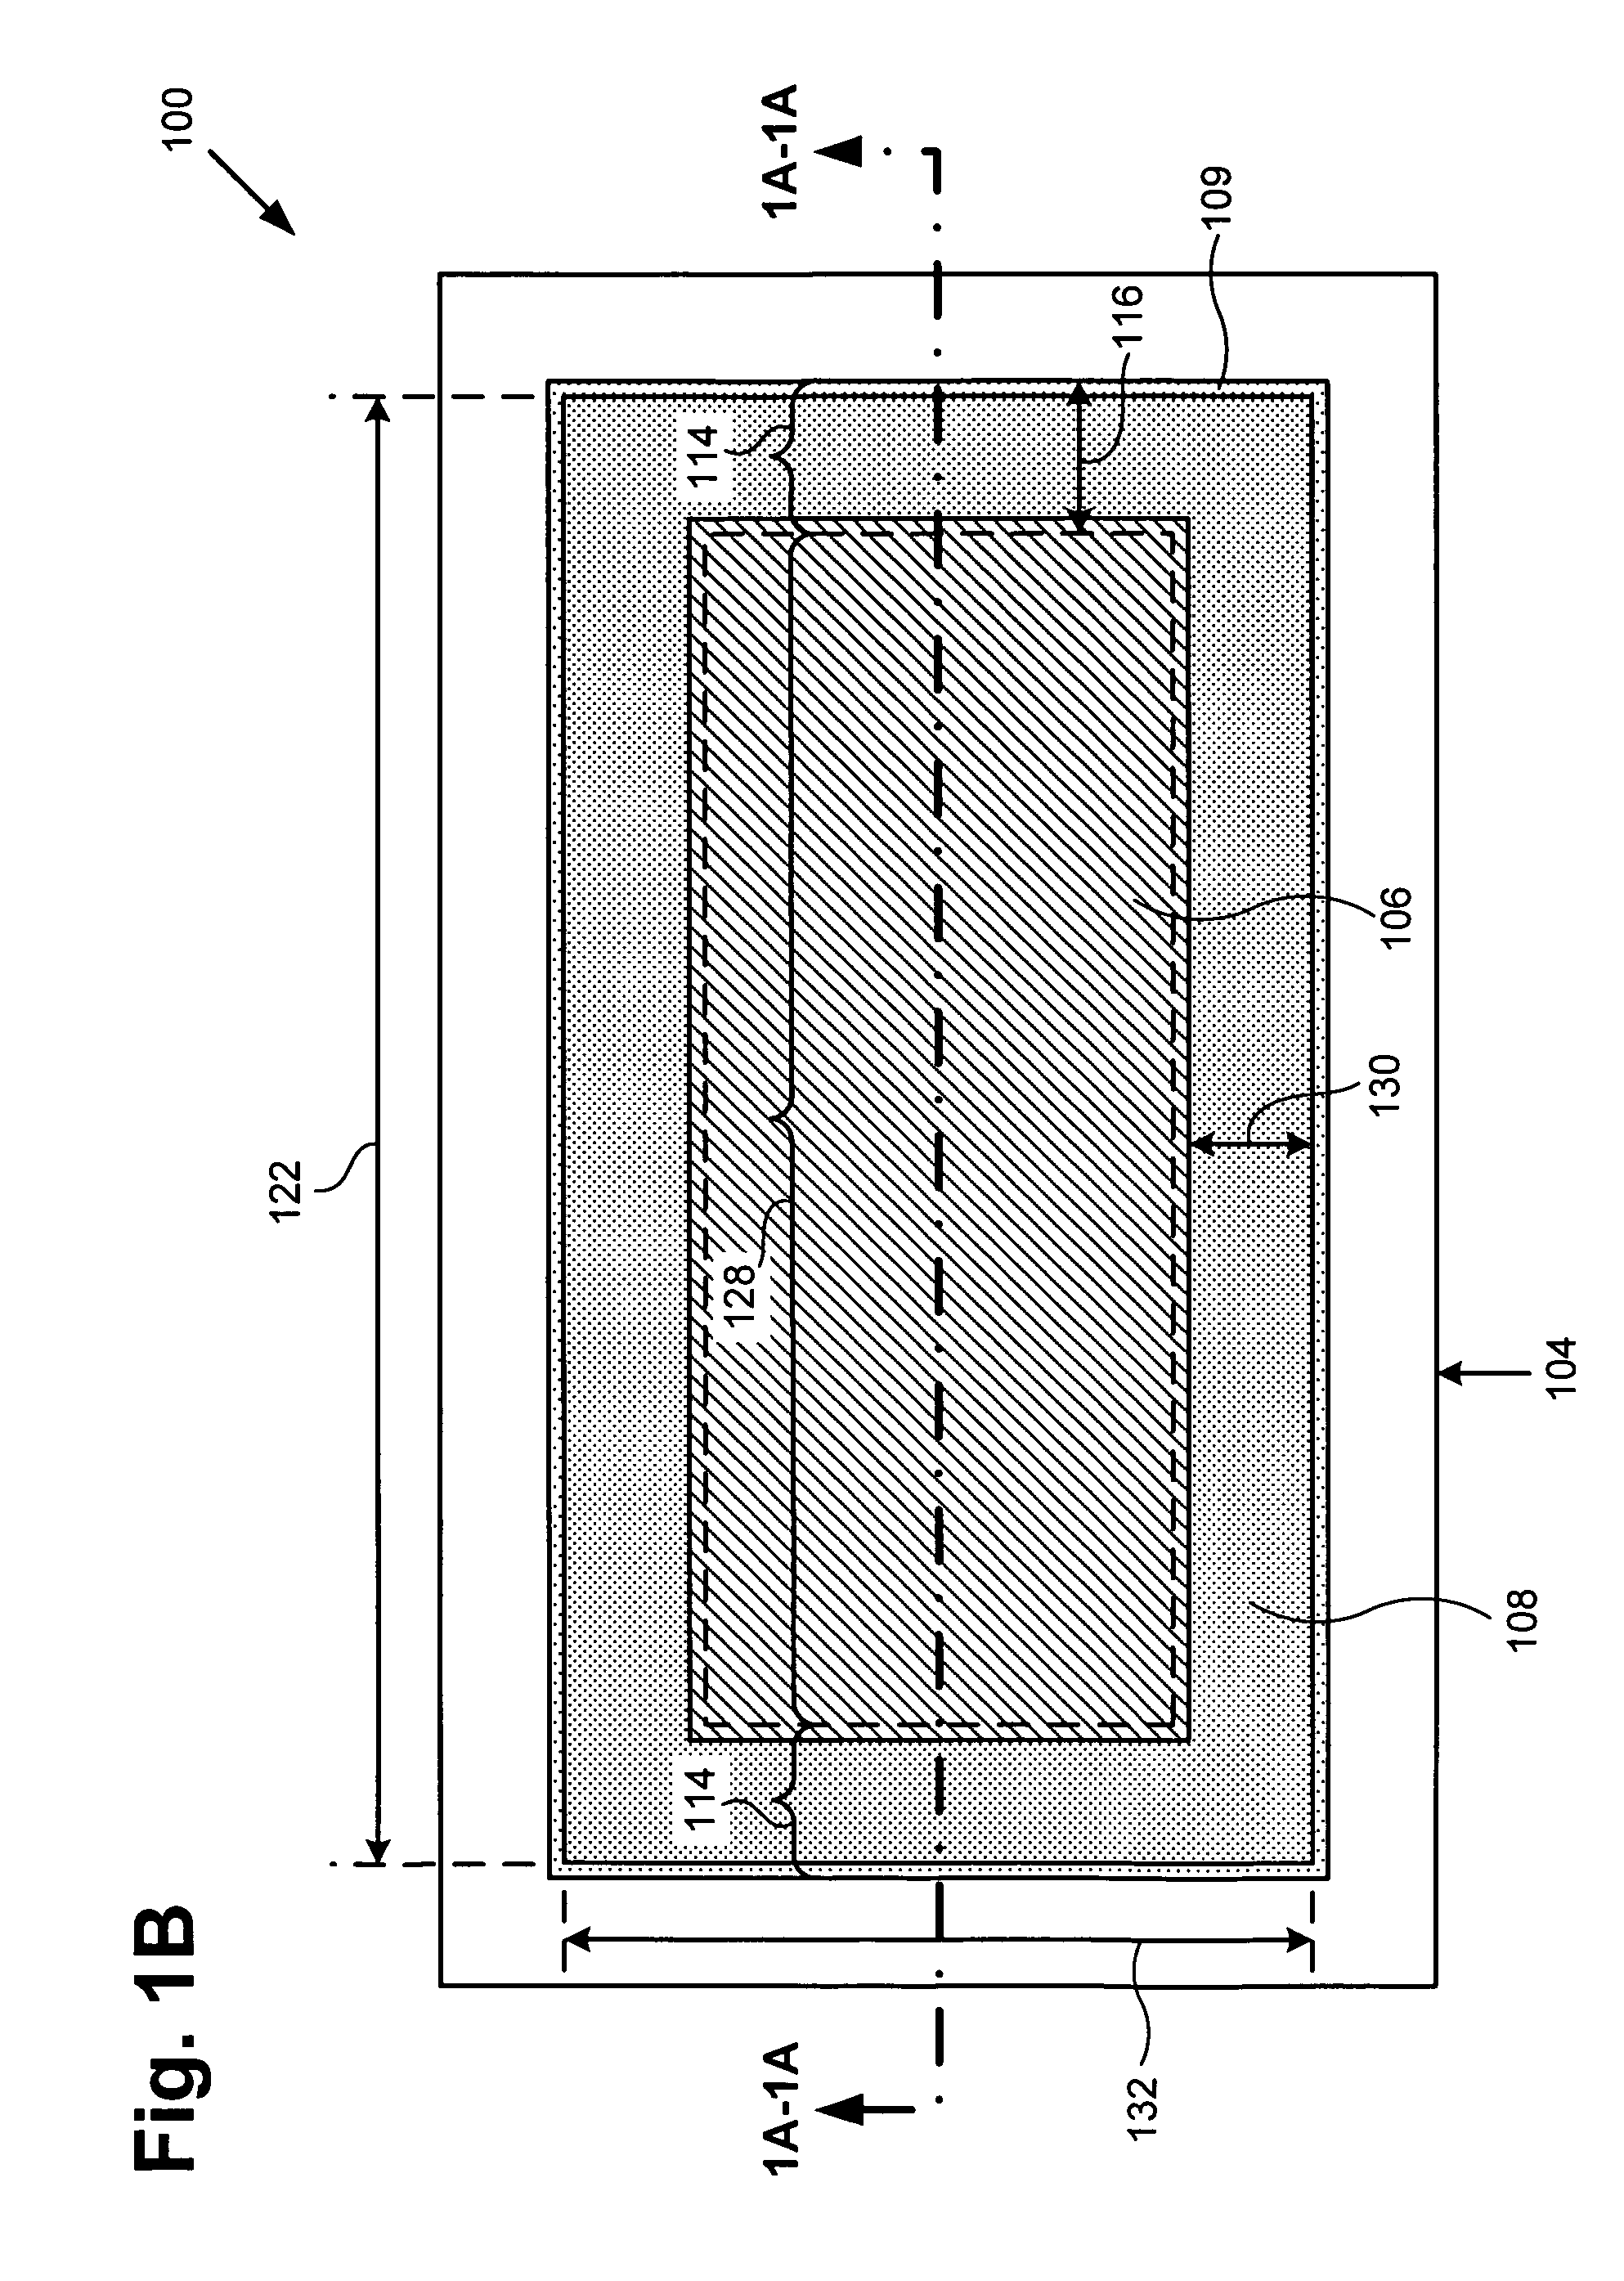 Bulk acoustic wave resonator with reduced energy loss